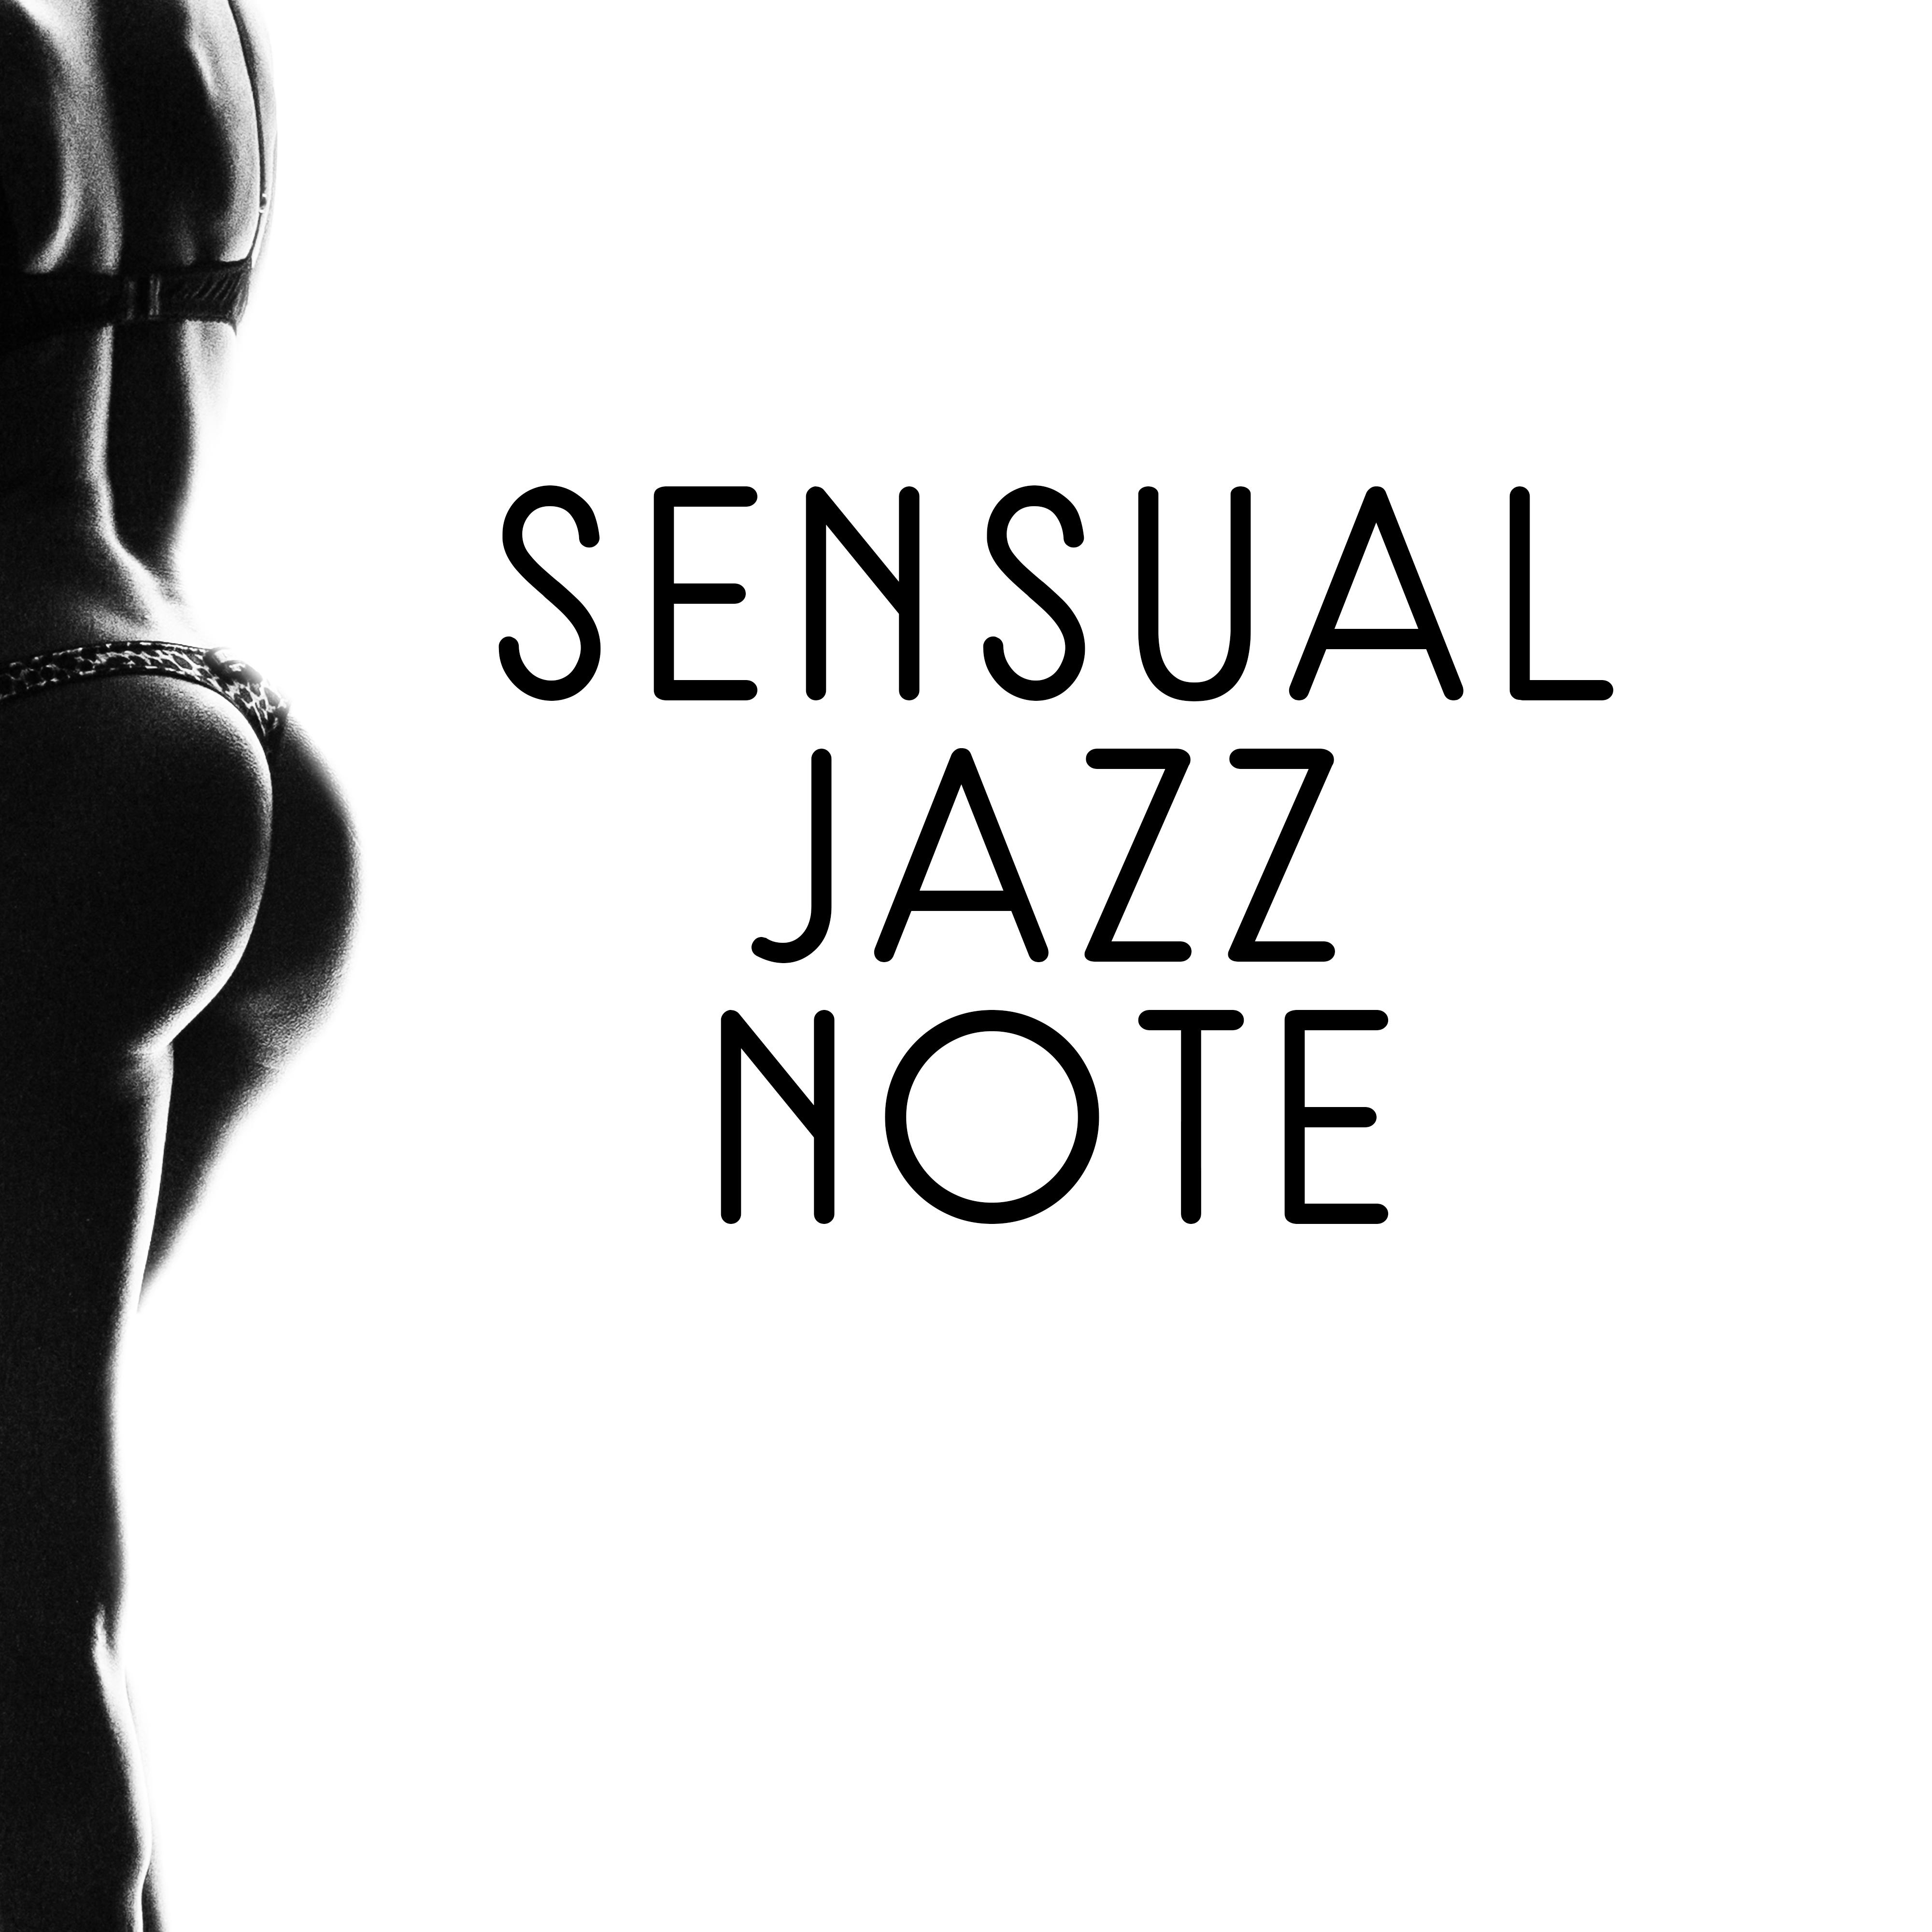 Sensual Jazz Note  Relaxing Jazz Music, Sounds for Lovers, Romantic Jazz Sounds, Easy Listening